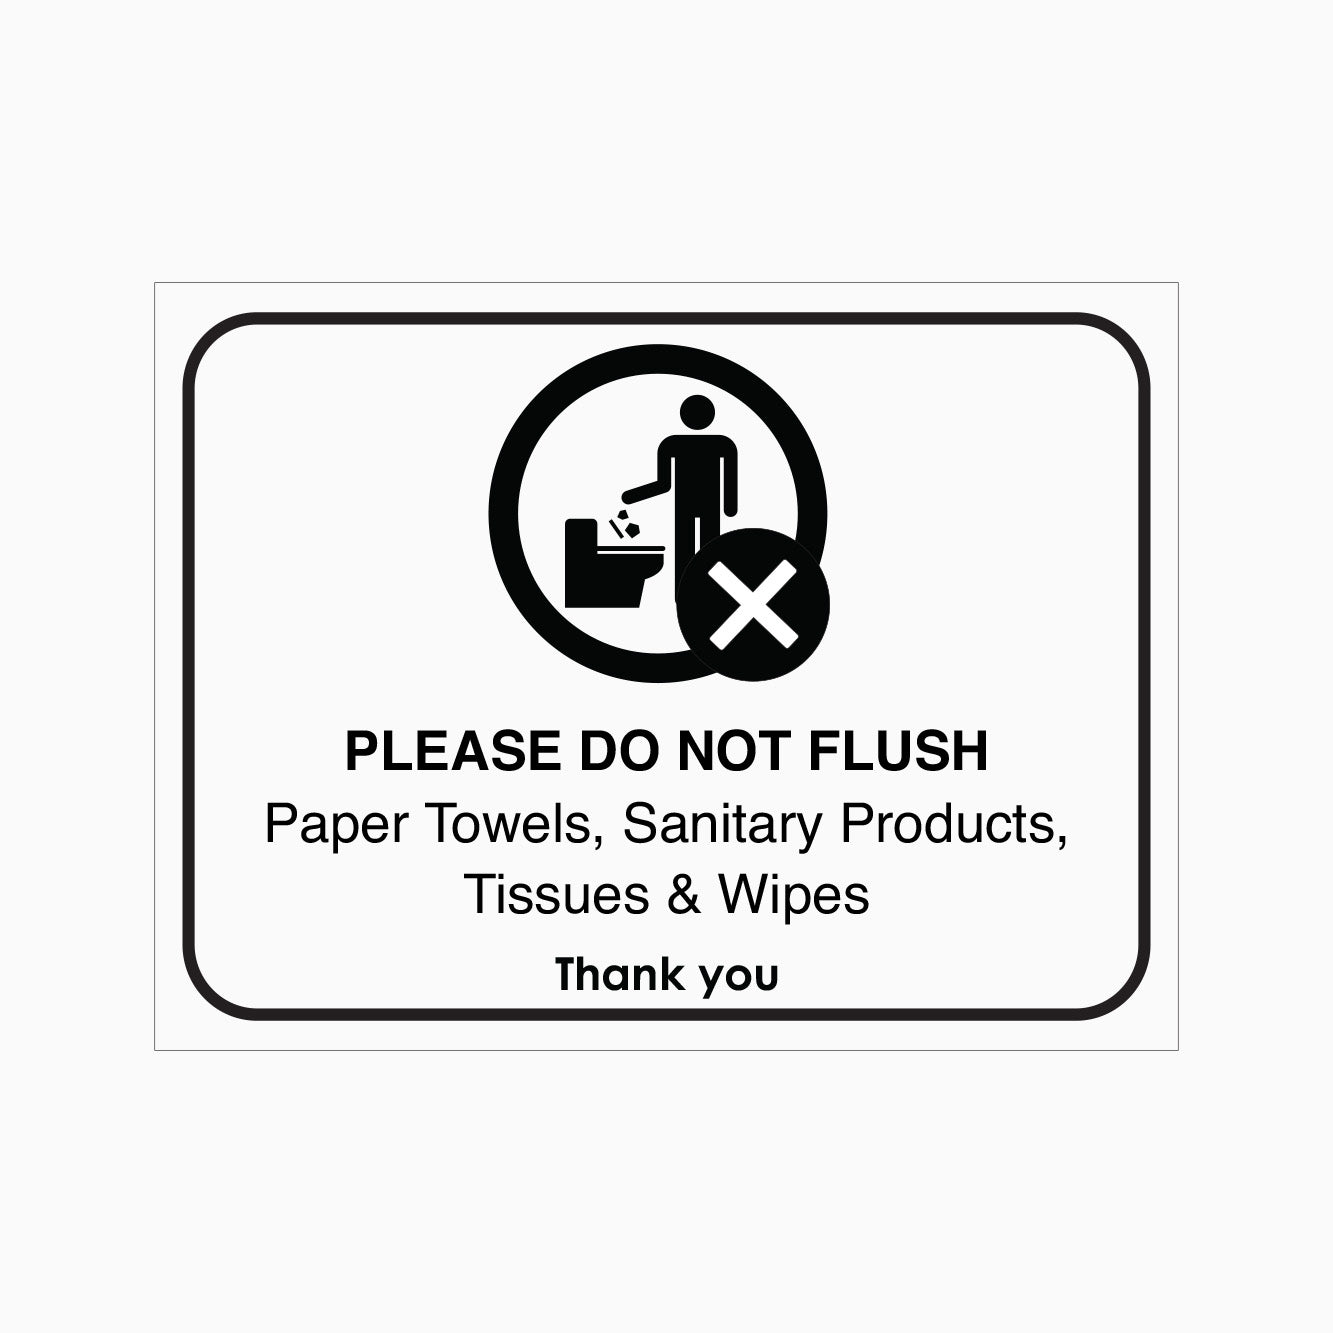 PLEASE DO NOT FLUSH PAPER TOWELS, SANITARY PRODUCTS, TISSUES and WIPES. THANK YOU SIGN